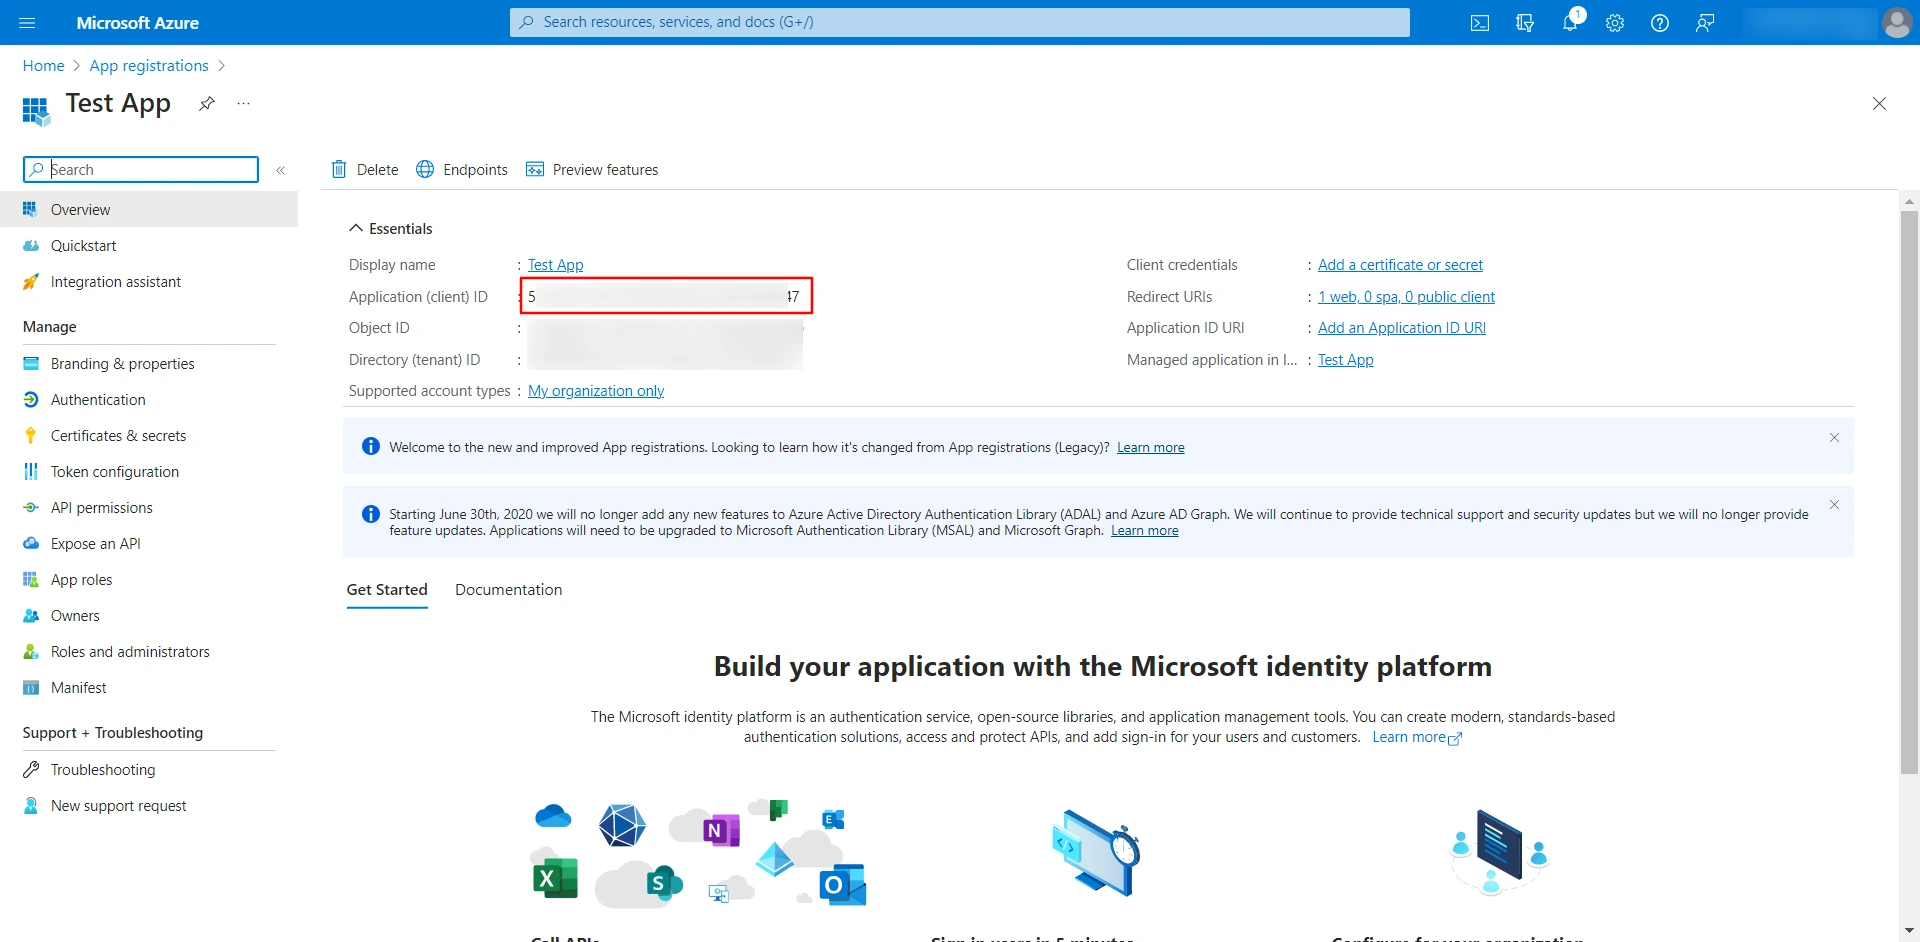 Azure AD SSO Overview